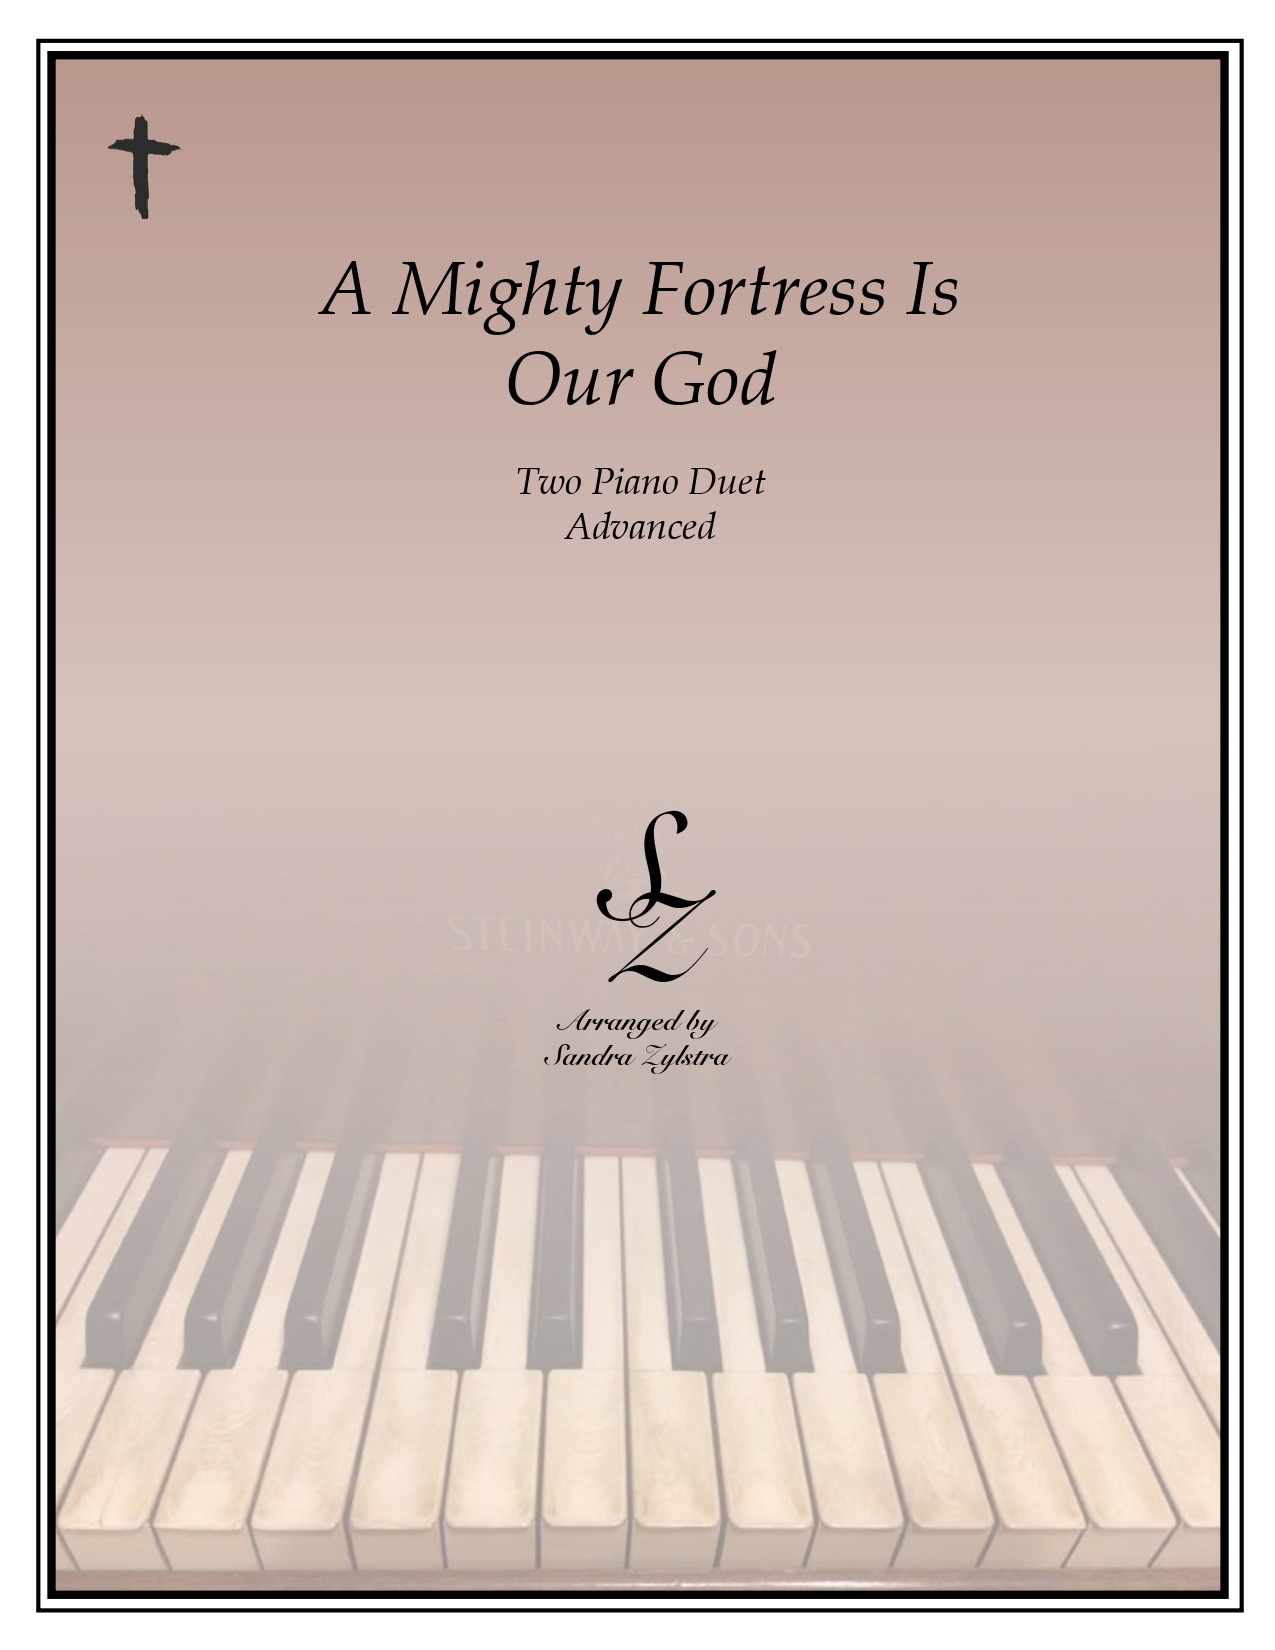 A Mighty Fortress Duet cover page 00011